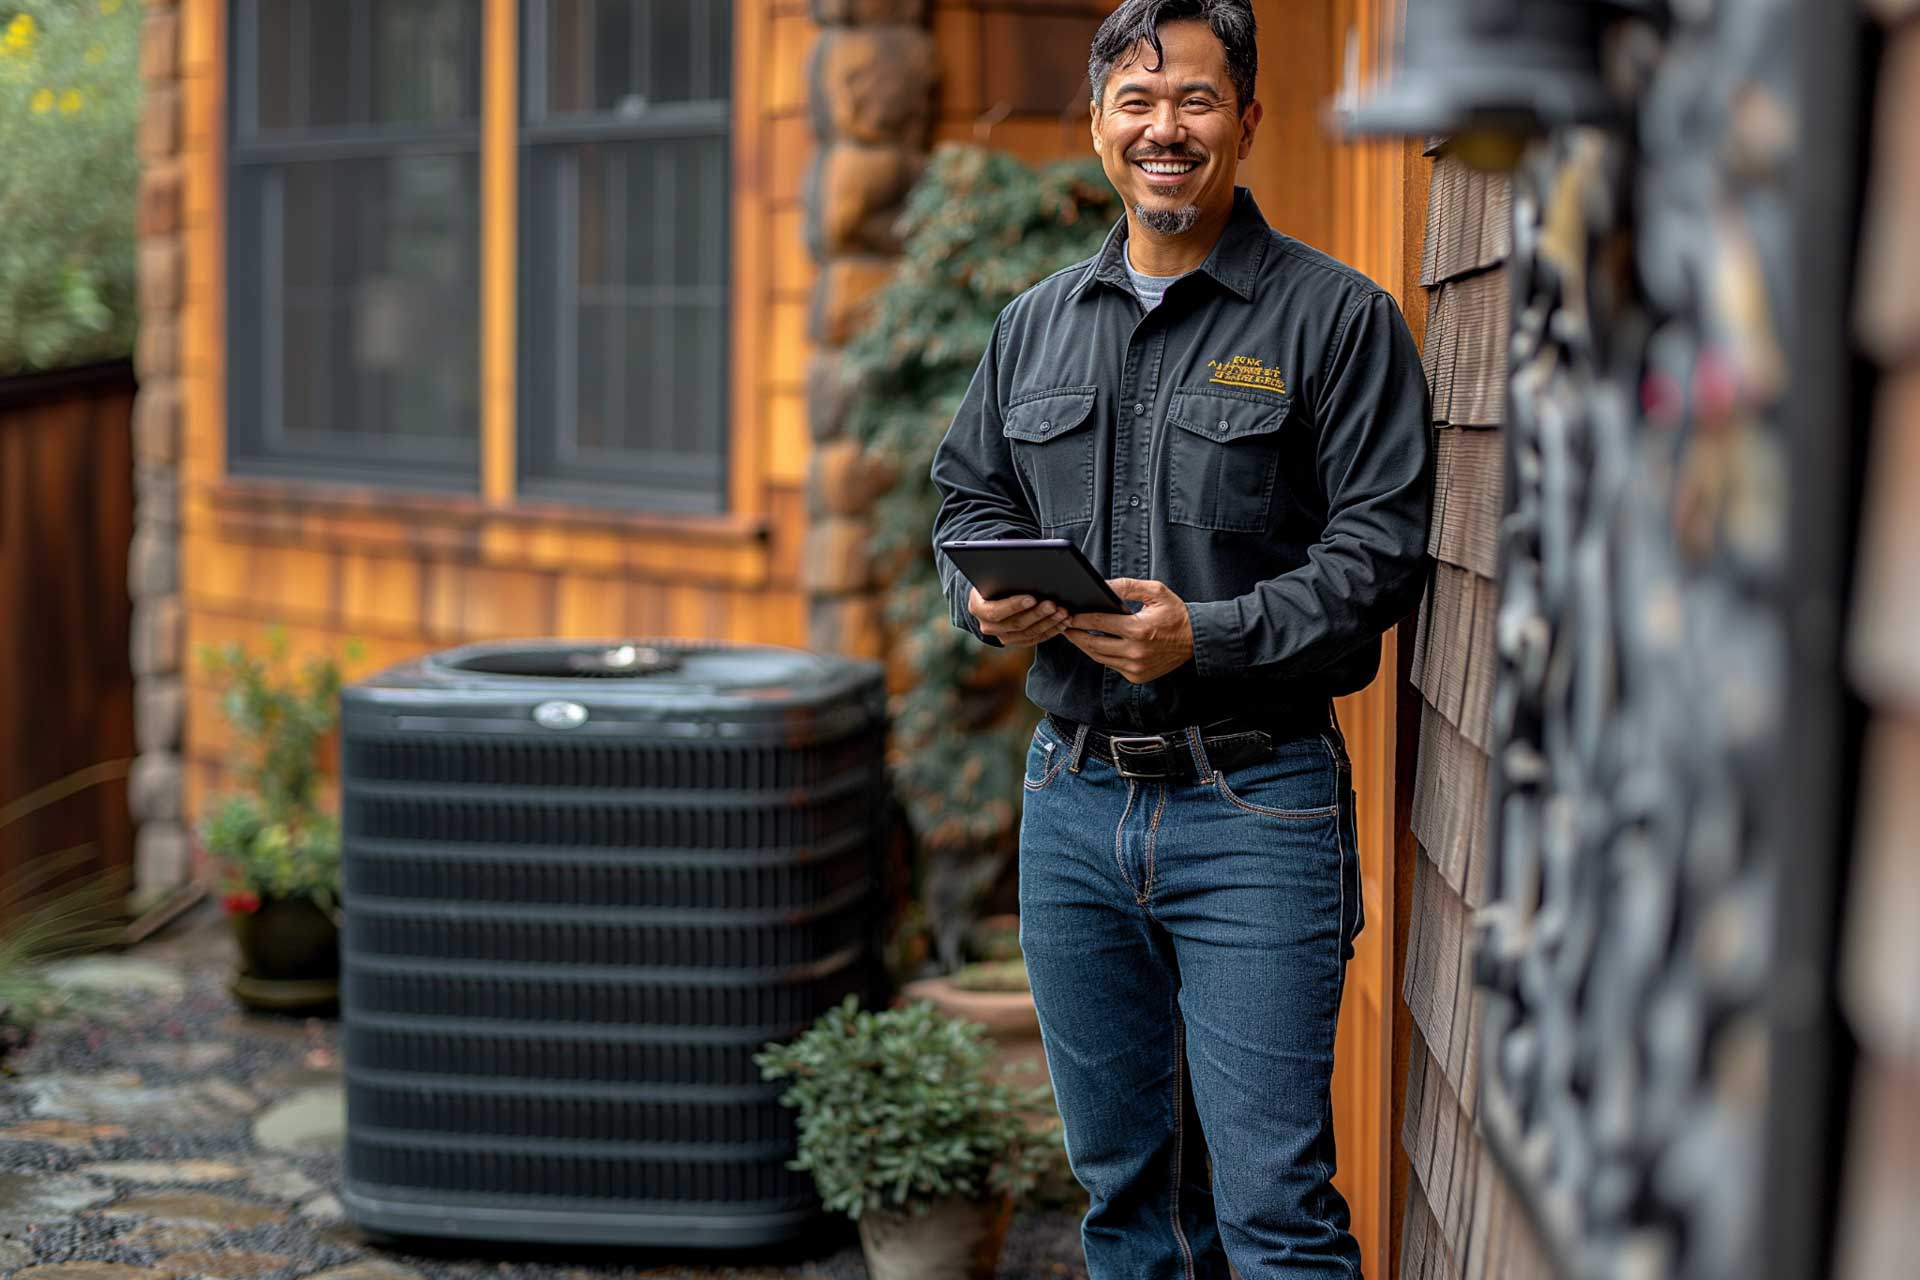 A man in a black jacket holding a tablet stands next to an outdoor air conditioning unit, smiling, with a cabin-like house in the background.